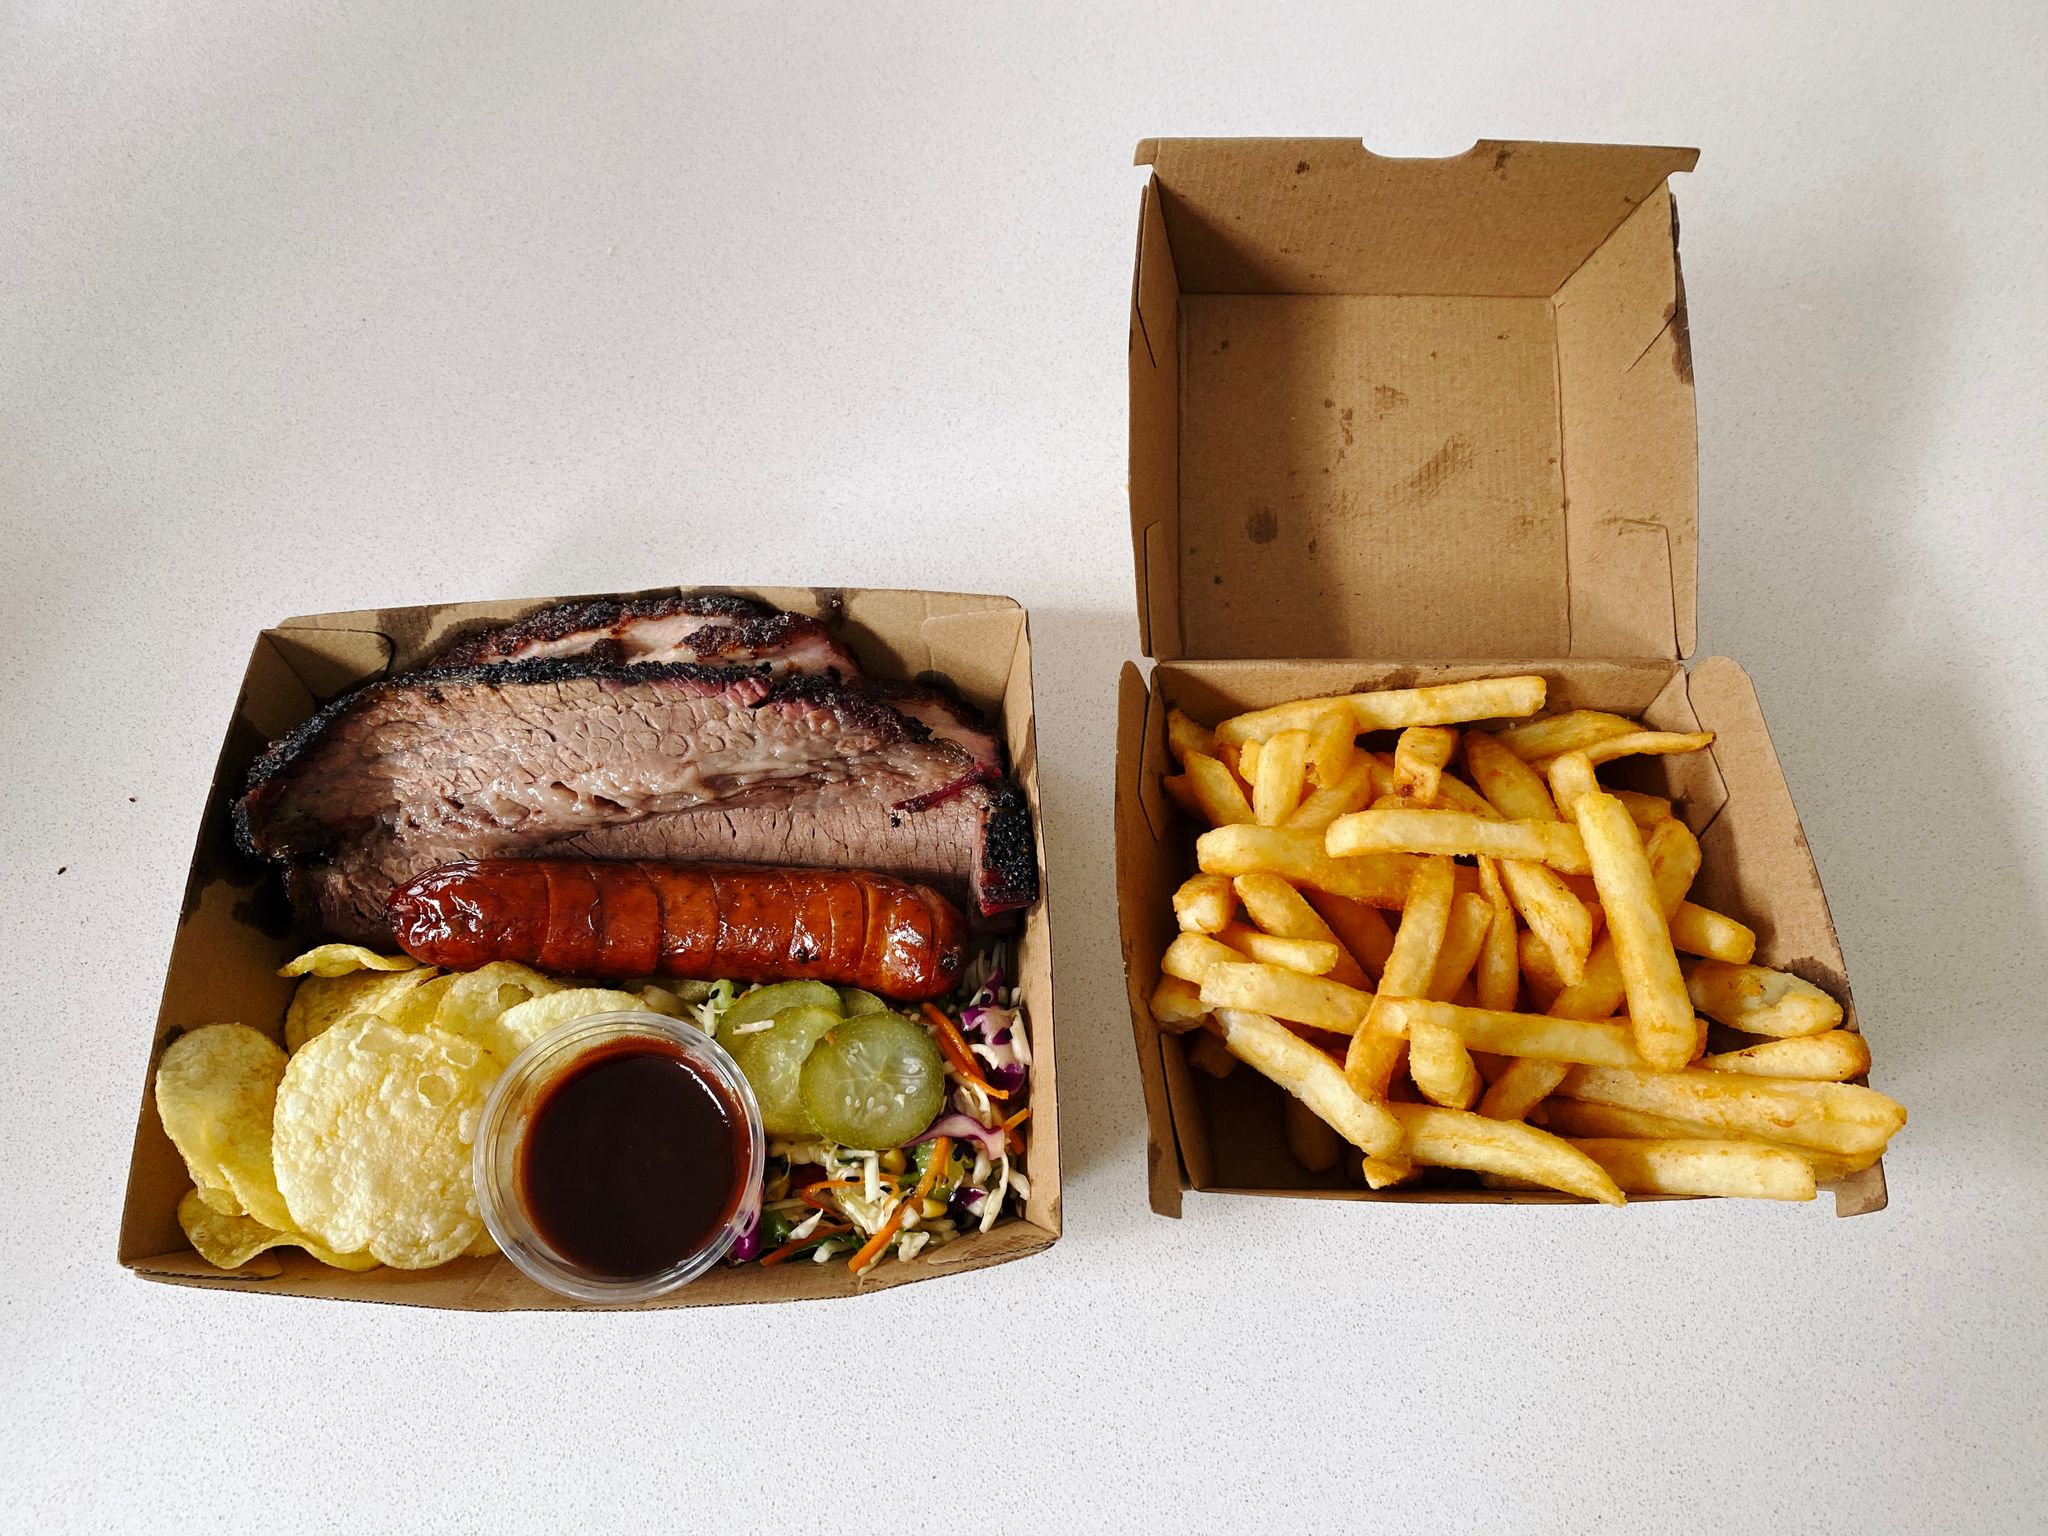 A photo of a takeaway box with beef brisket, pork belly, and sausage in it, as well as potato chips and some salady thing I didn't eat because it has coriander in it, and other box with hot chips in it. I am extremely full.